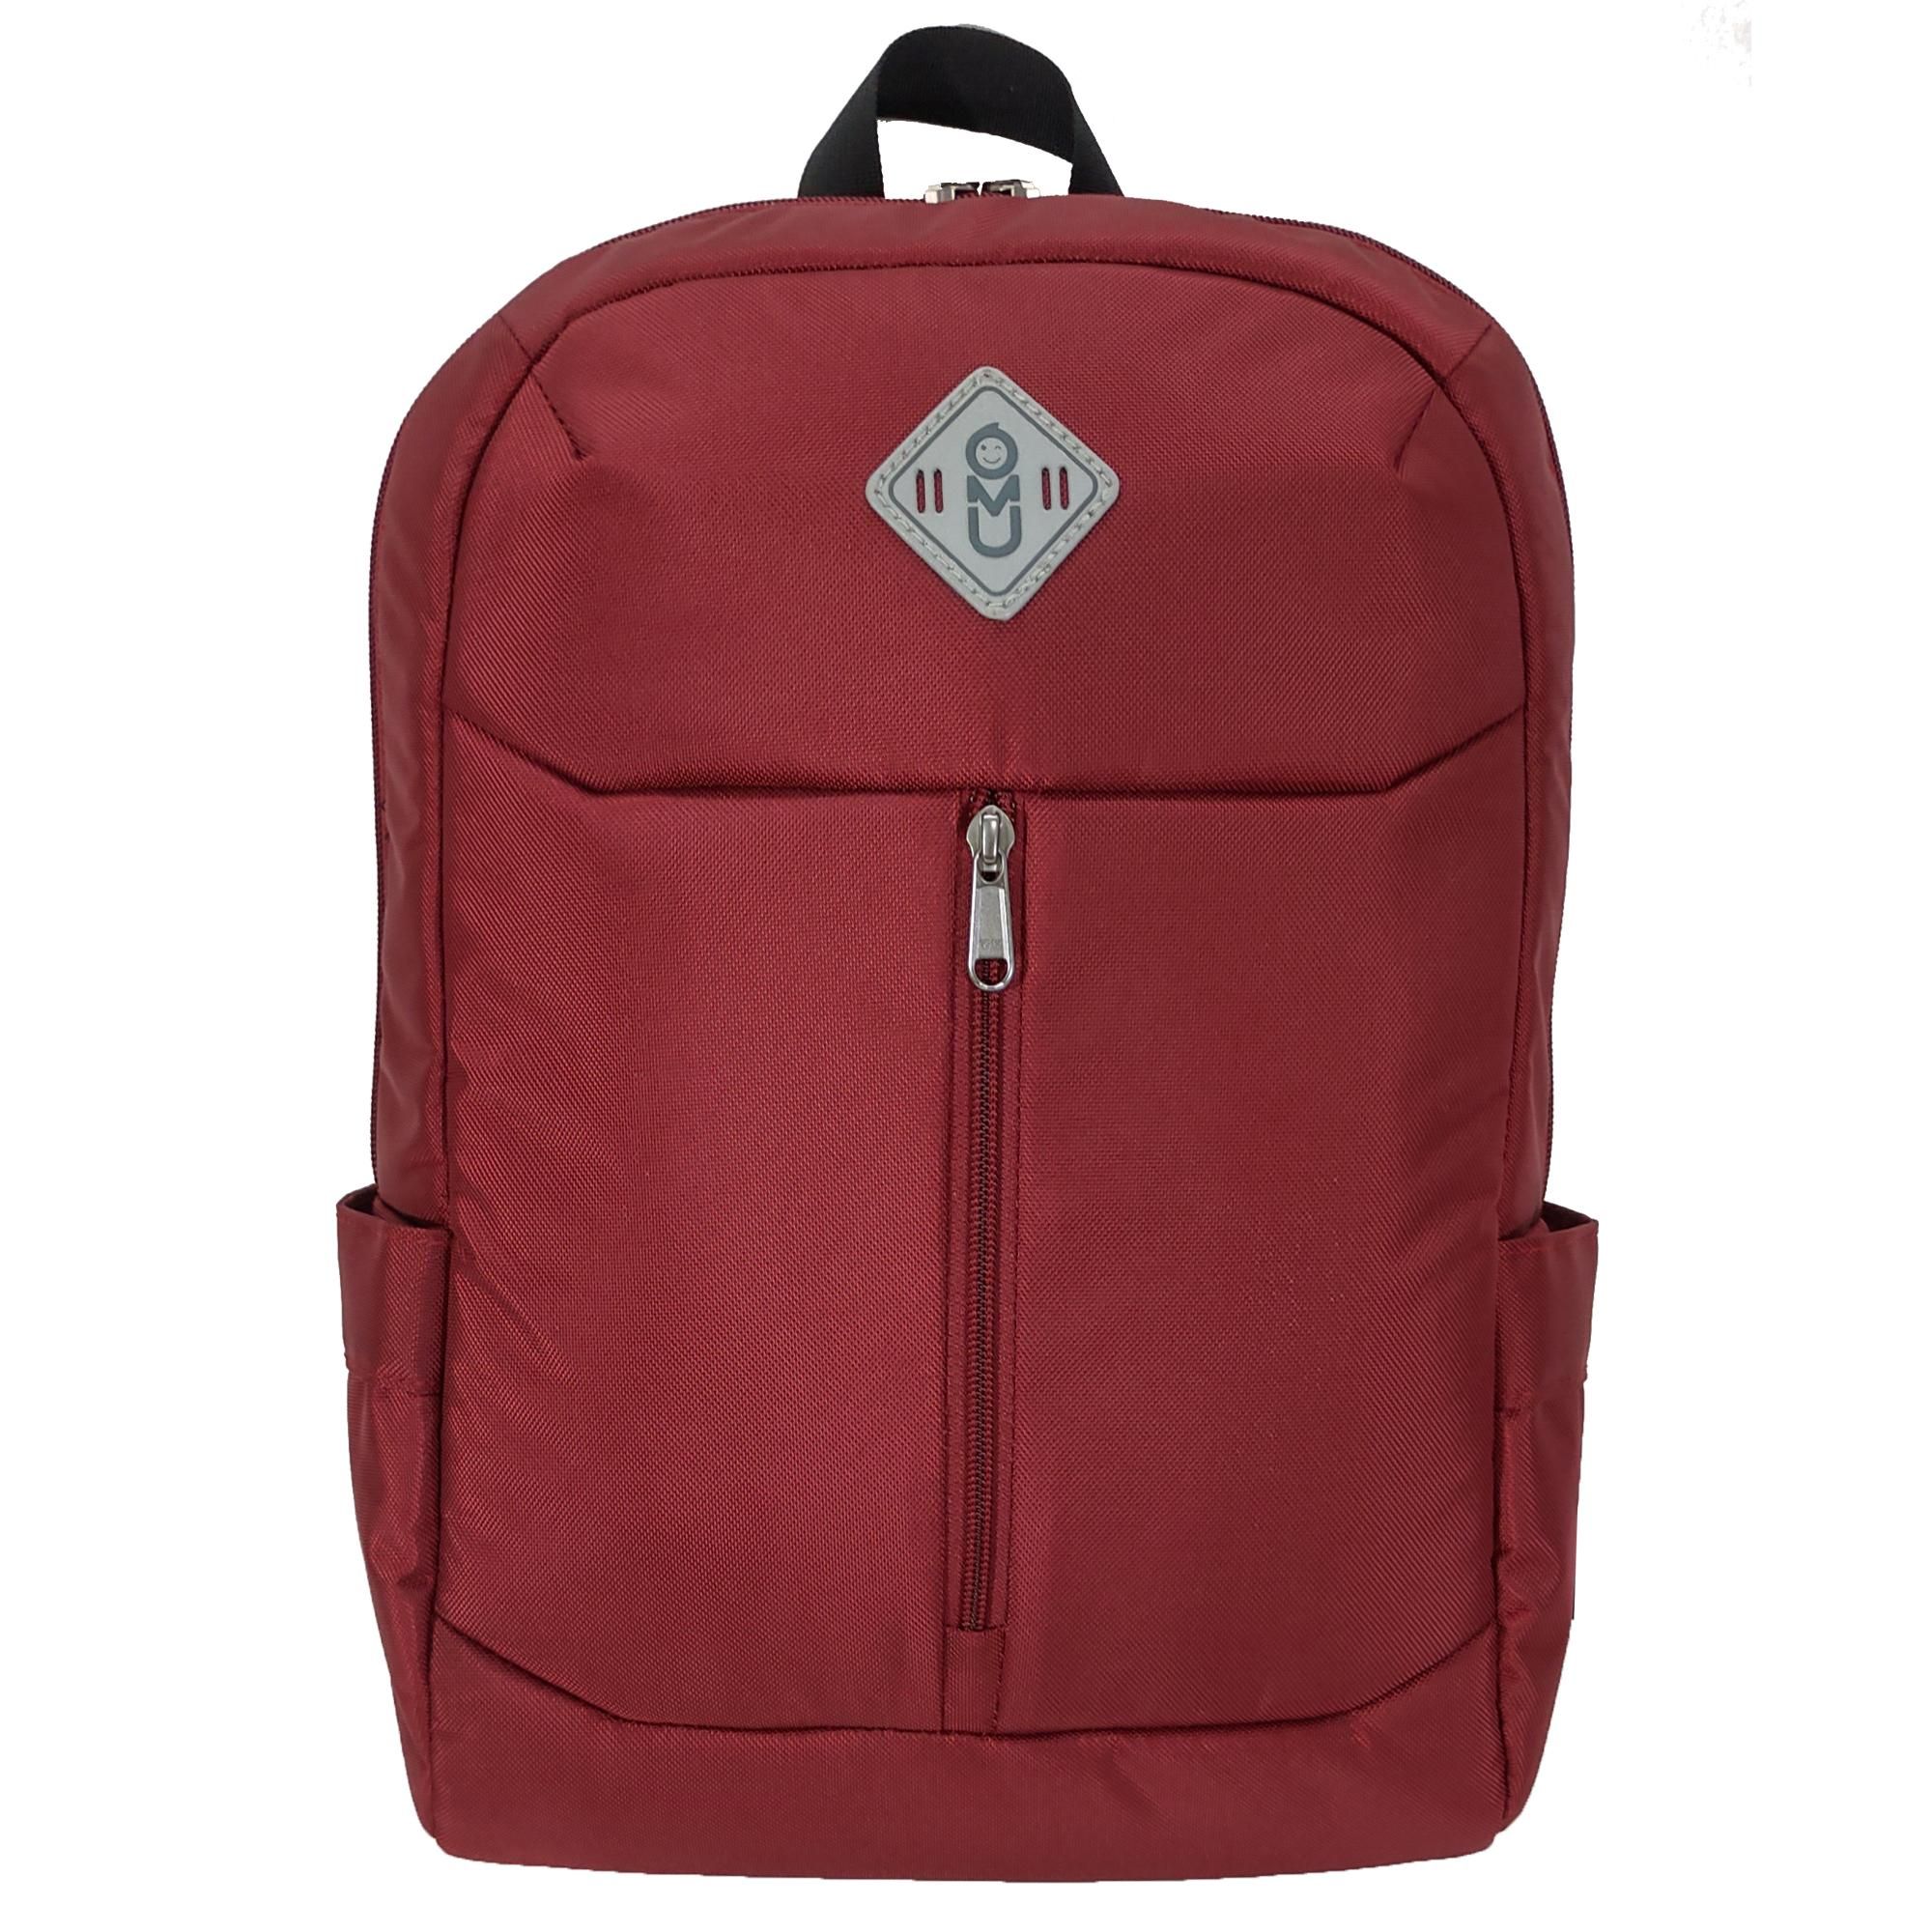  Balo UMO EVANKI BackPack D.Red- Balo Laptop Cao Cấp 